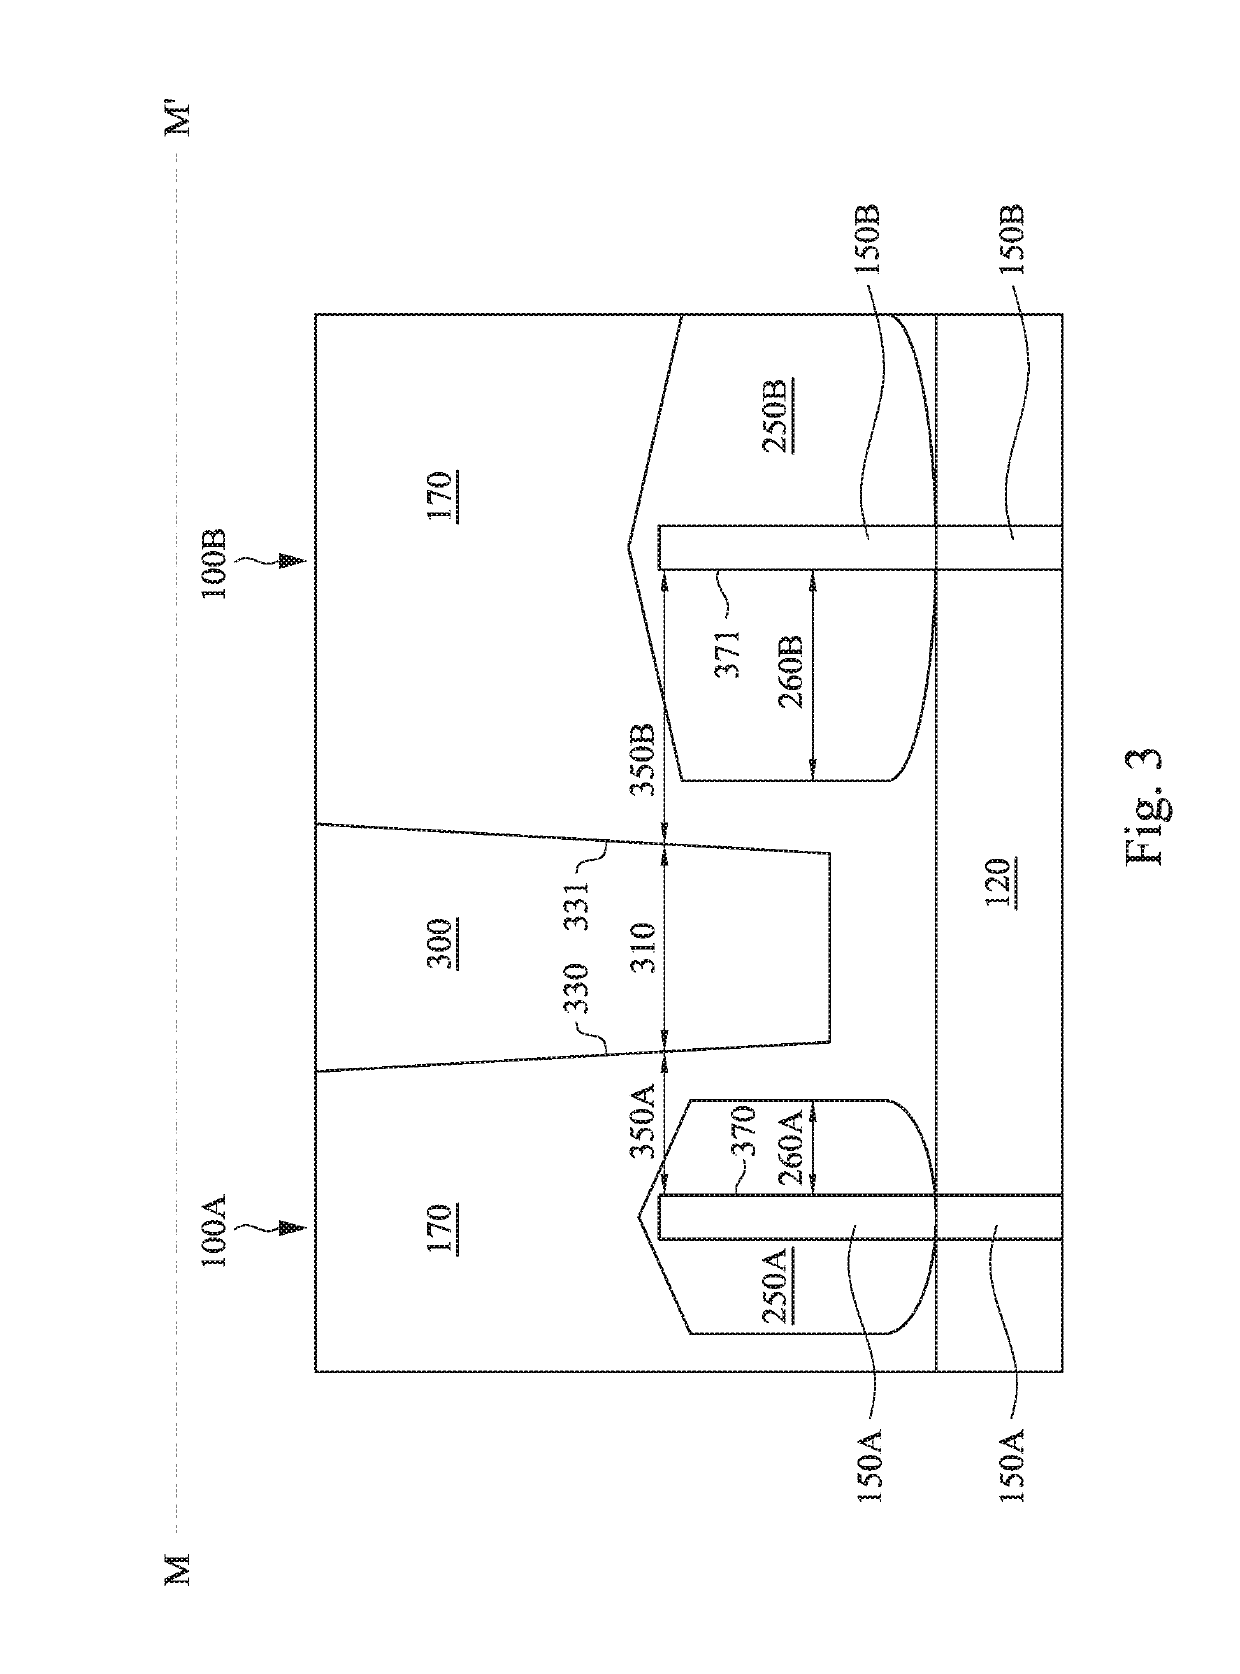 Isolation structure having different distances to adjacent finfet devices